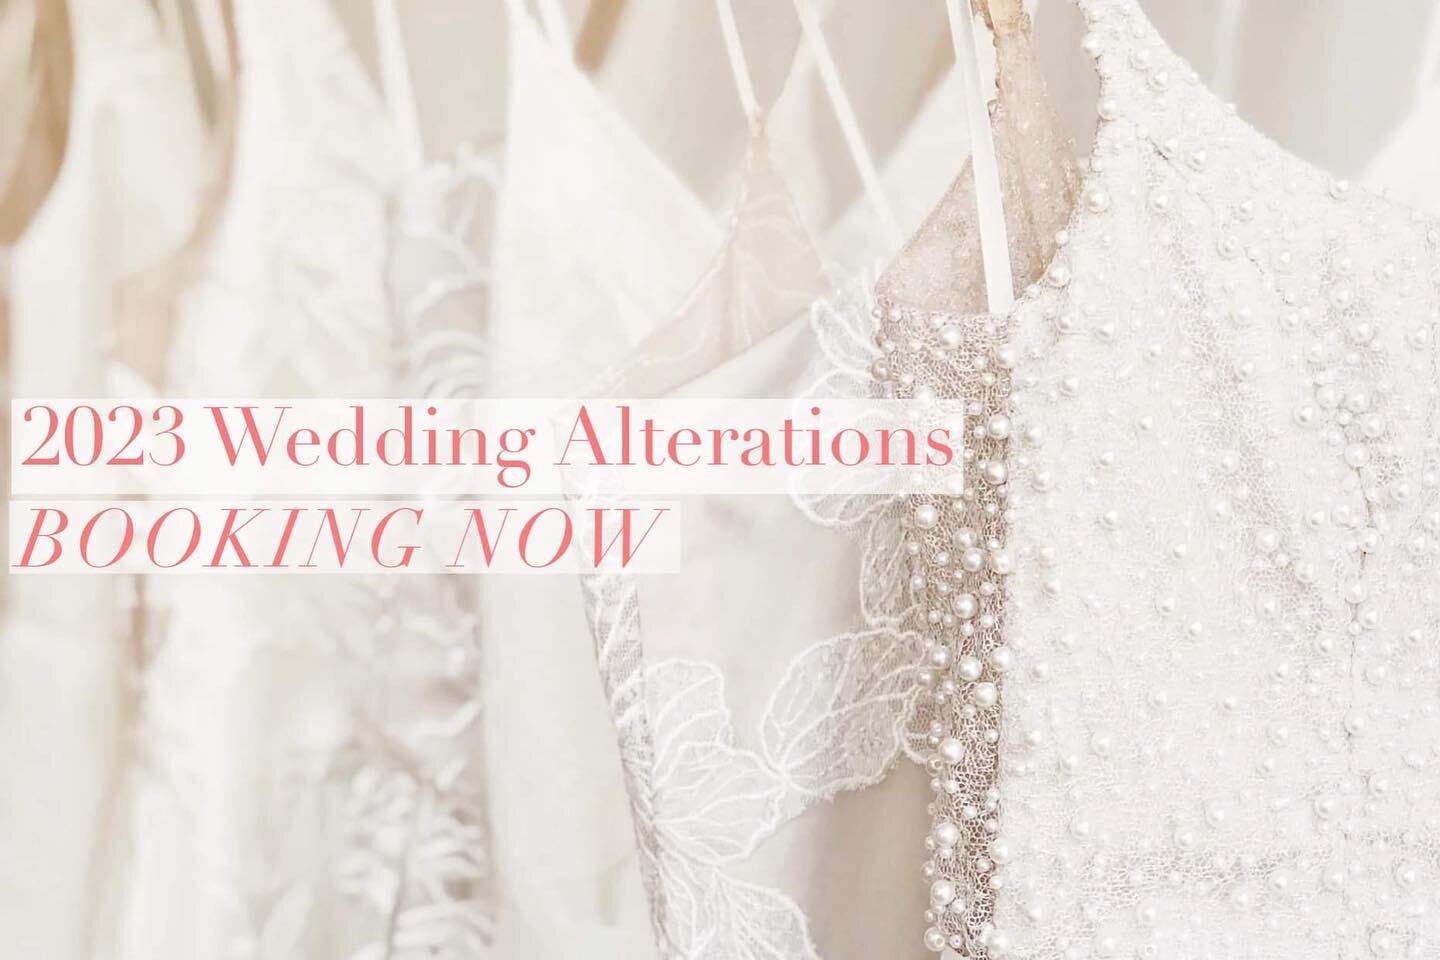 Hi Brides-to-Be! I am now booking appointments for alterations in 2023. PM me on Facebook or send an inquiry through my website to book an appointment as soon as possible, as spots fill quickly. Can&rsquo;t wait to work on your beautiful dresses 🤍
.